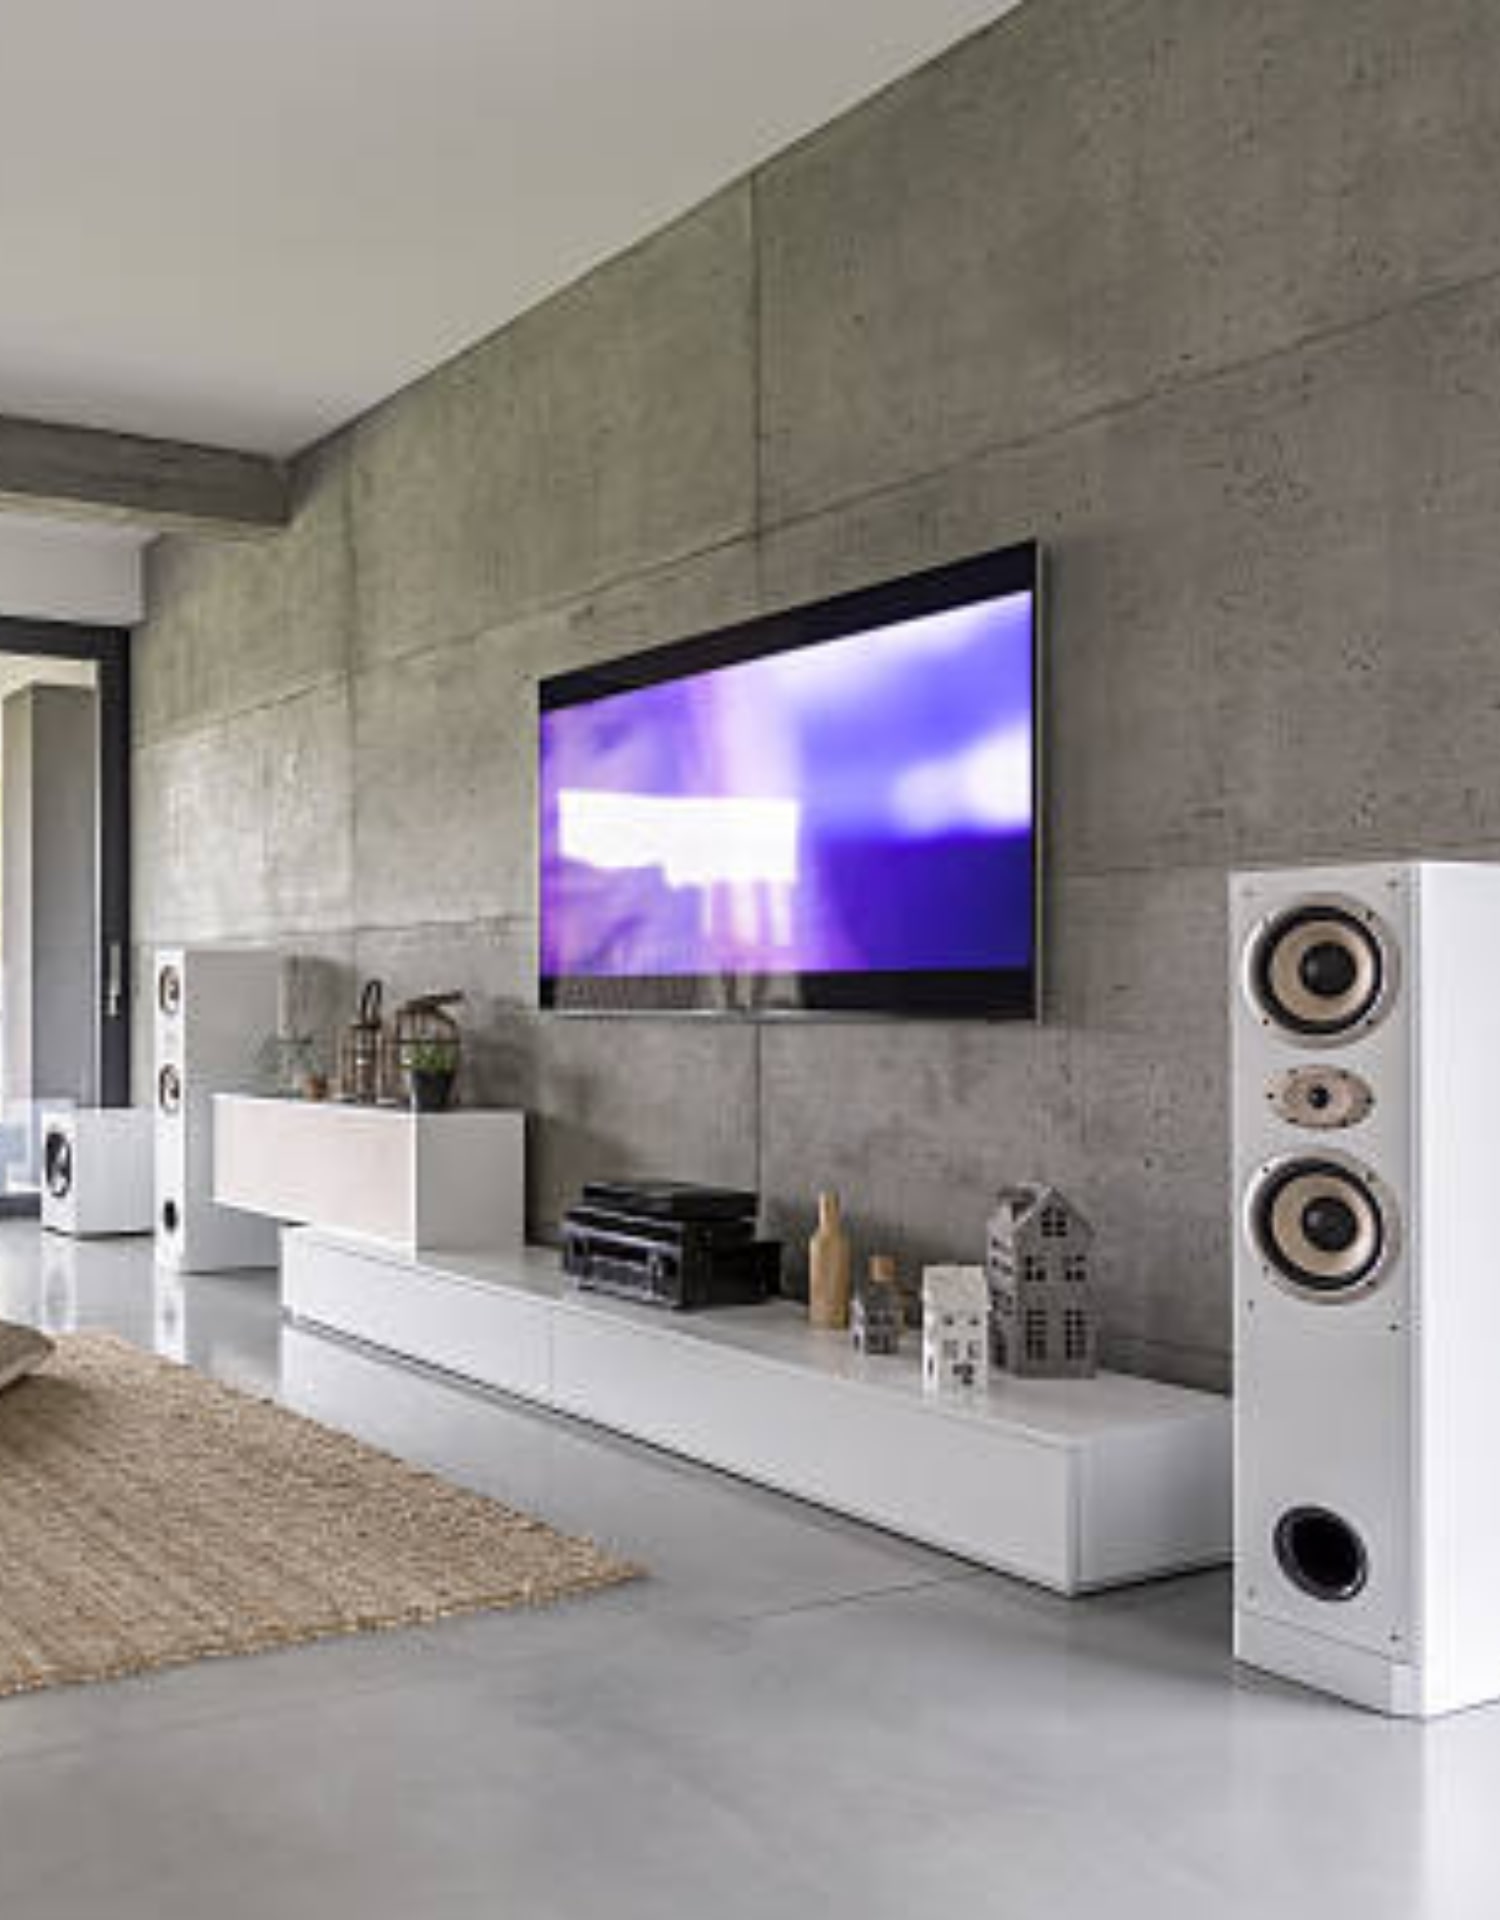 Installation of Home Sound Systems